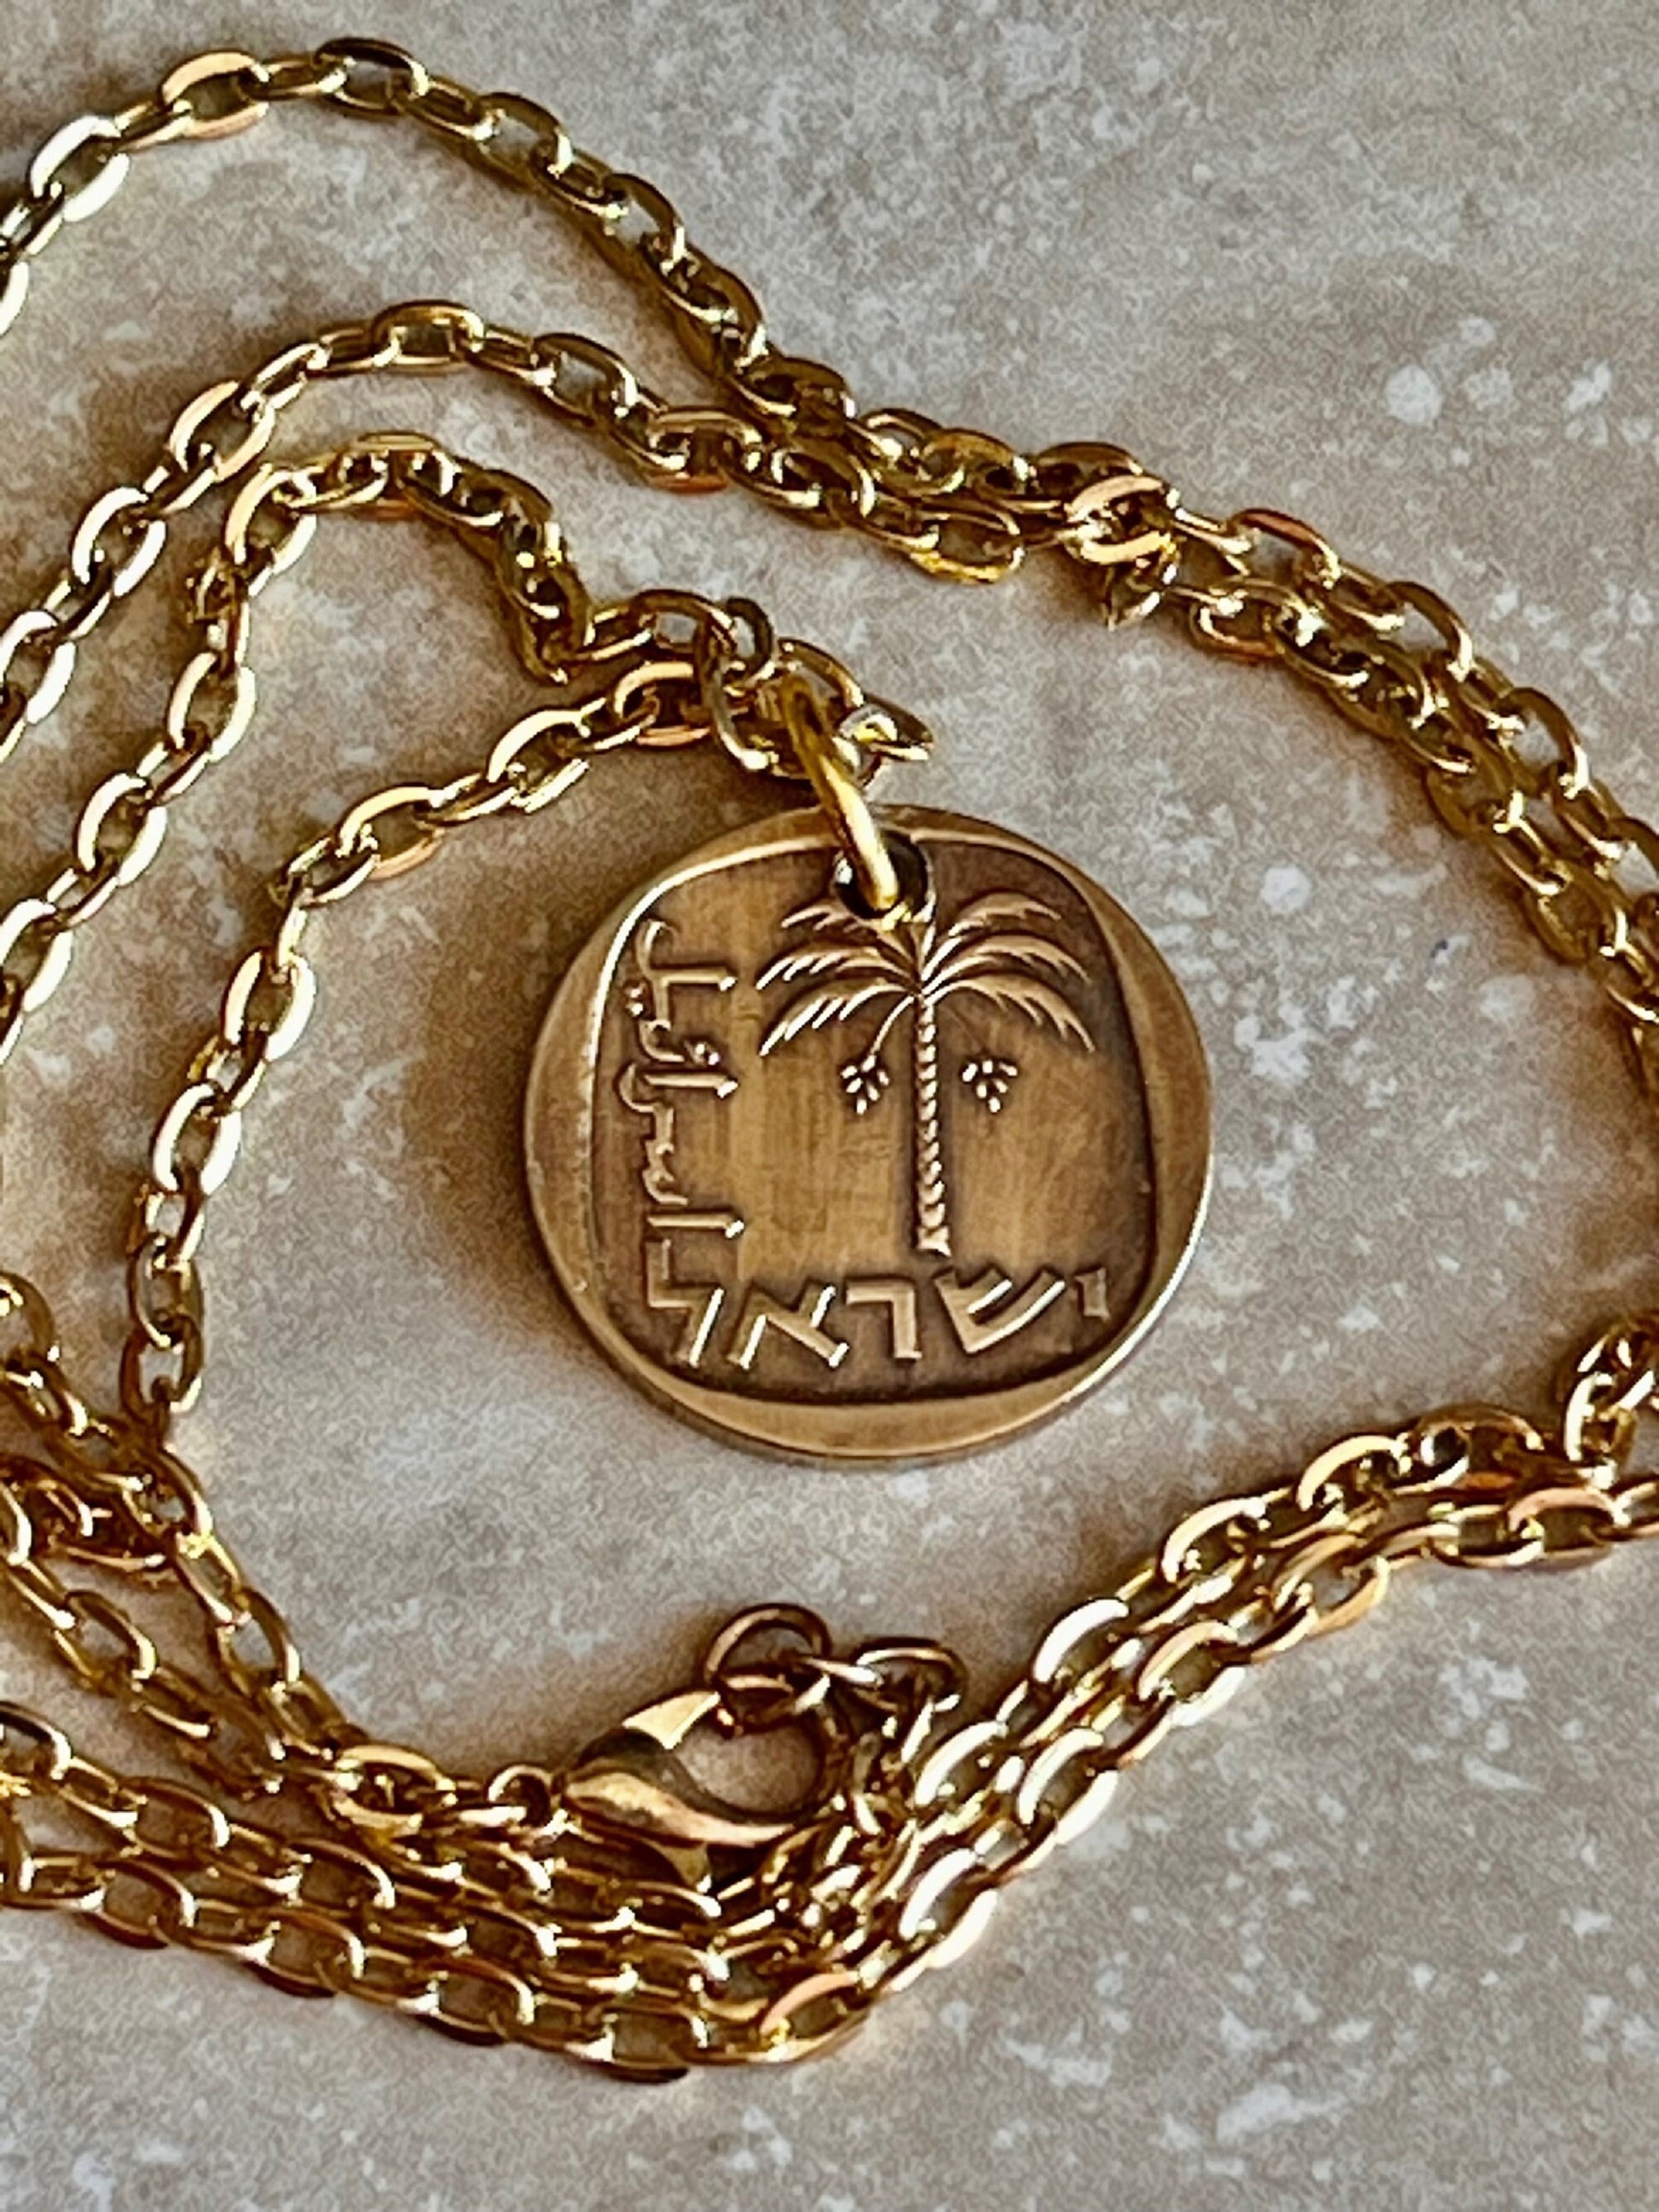 Israel Coin Necklace 10 Agorot Coin Personal Necklace Old Vintage Handmade Jewelry Gift Friend Charm For Him Her World Coin Collector